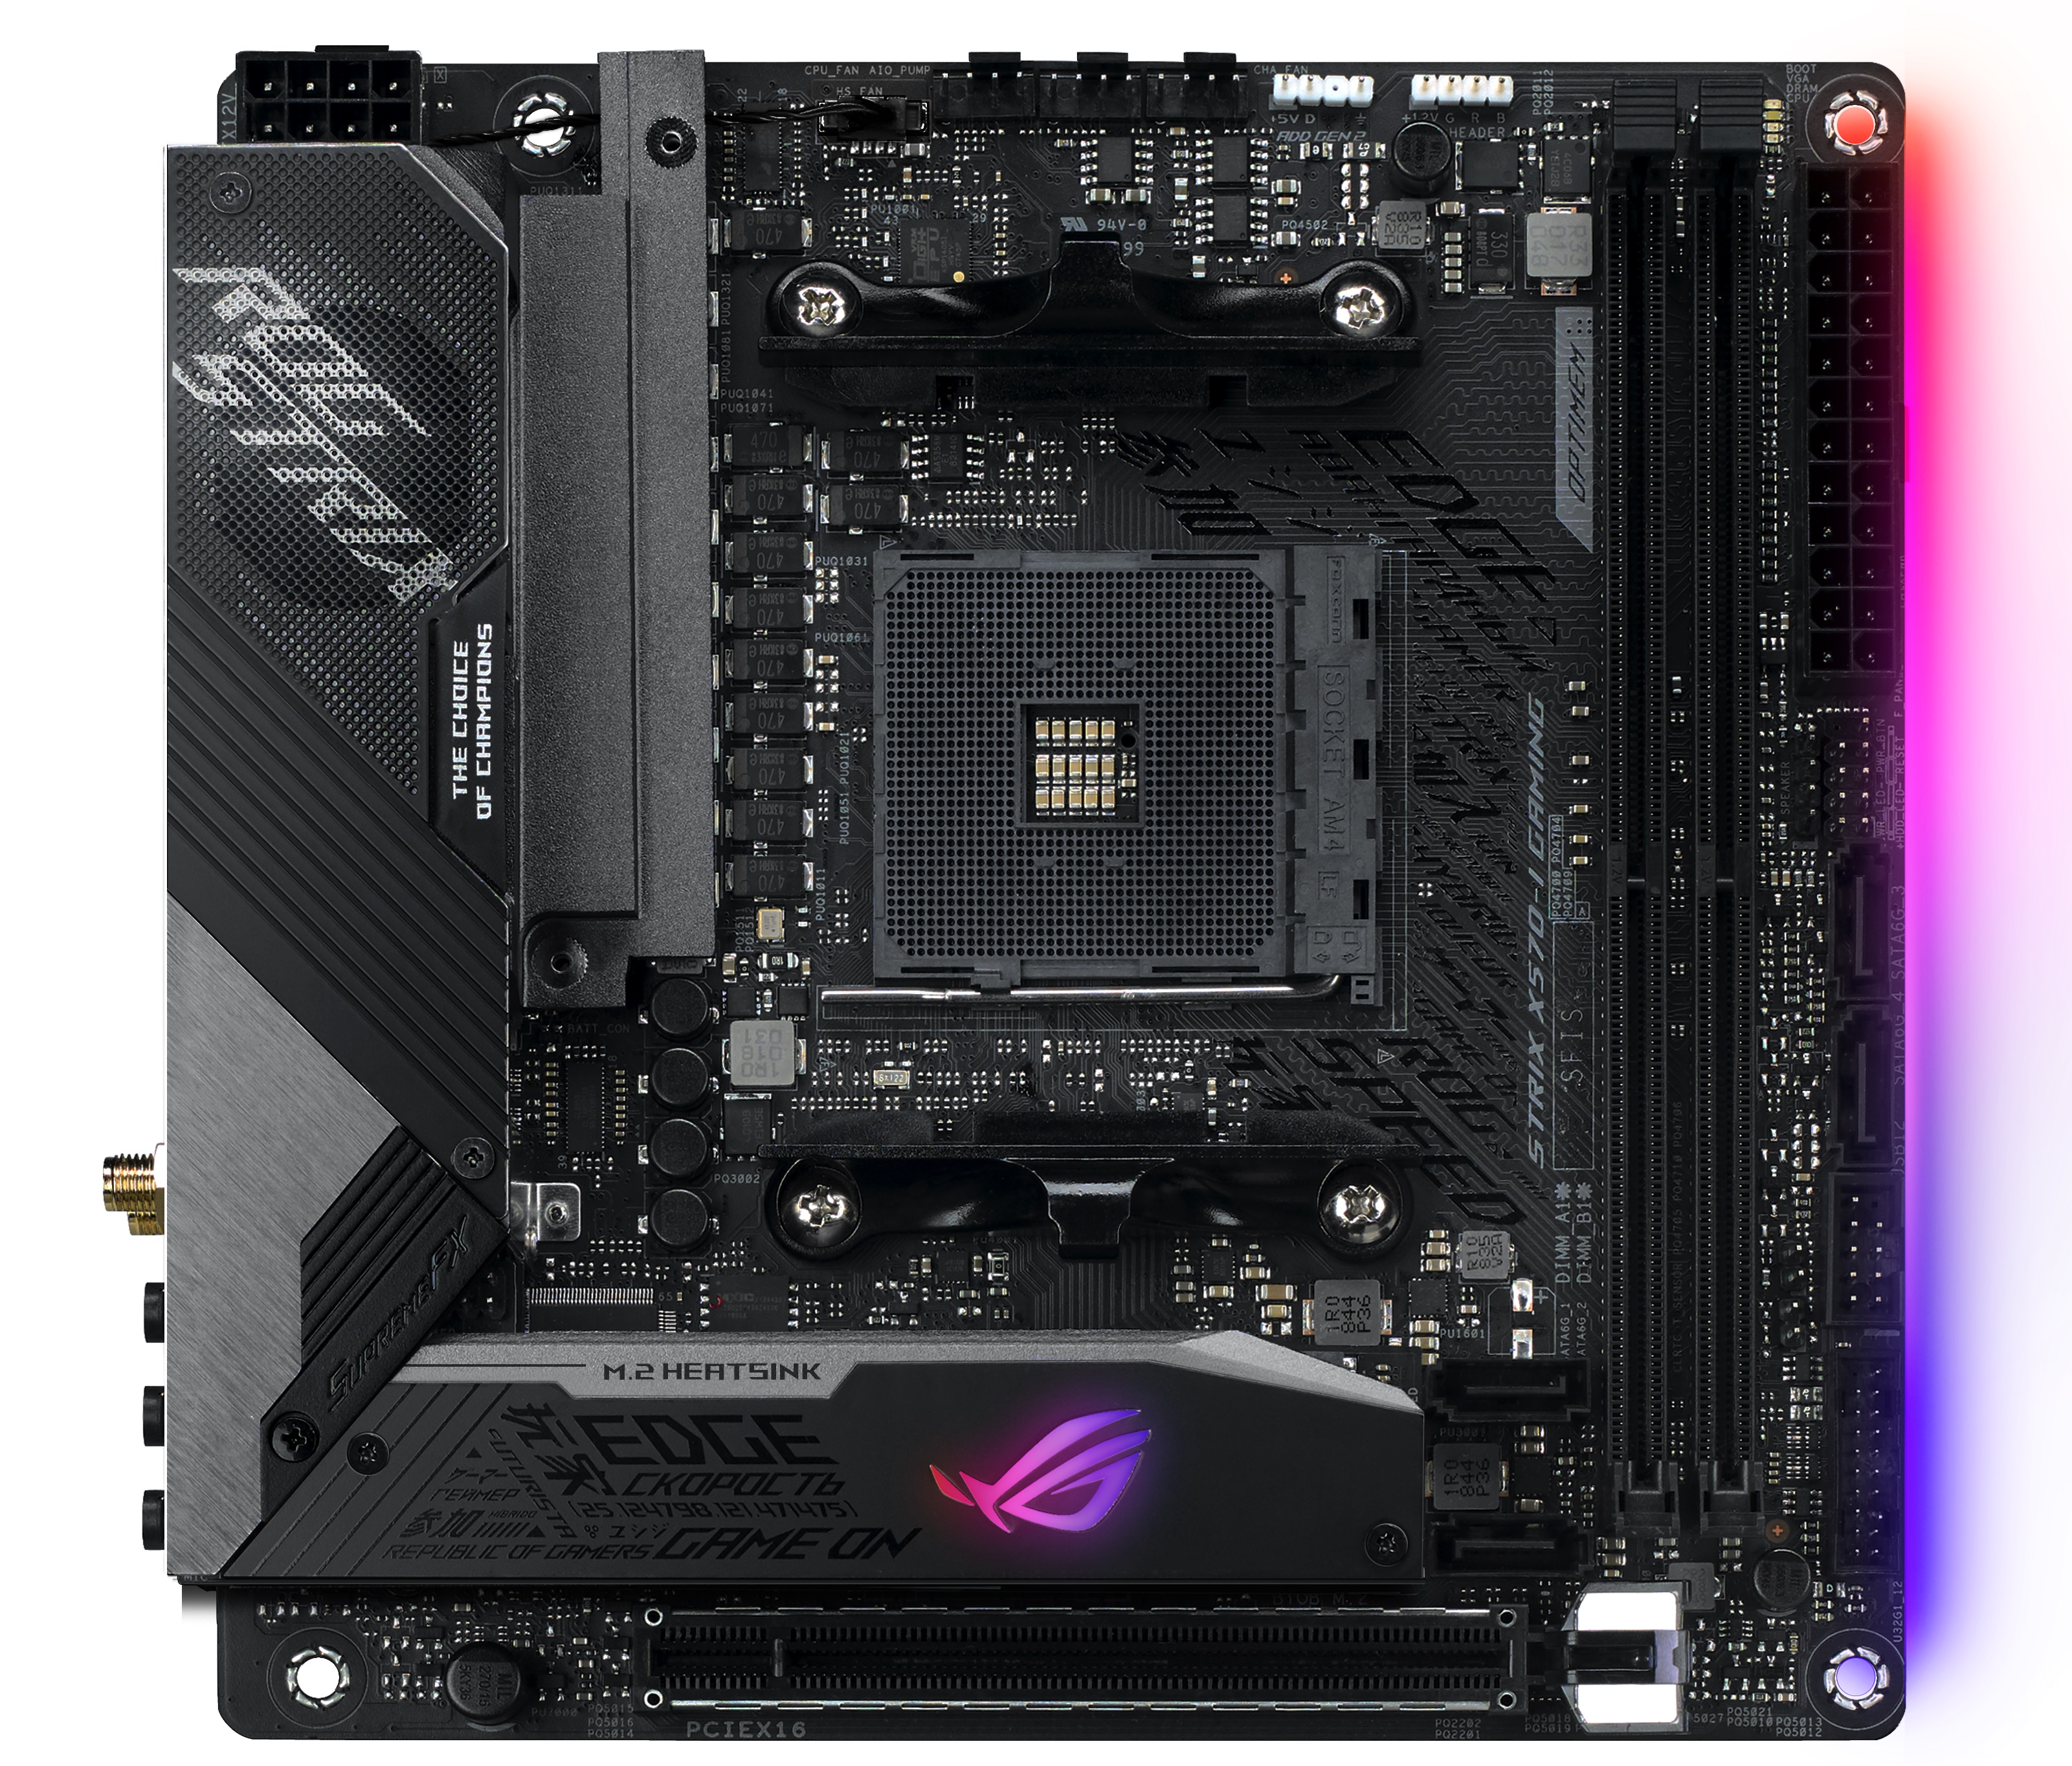 Asus Rog Strix X570 I Gaming The Amd X570 Motherboard Overview Over 35 Motherboards Analyzed